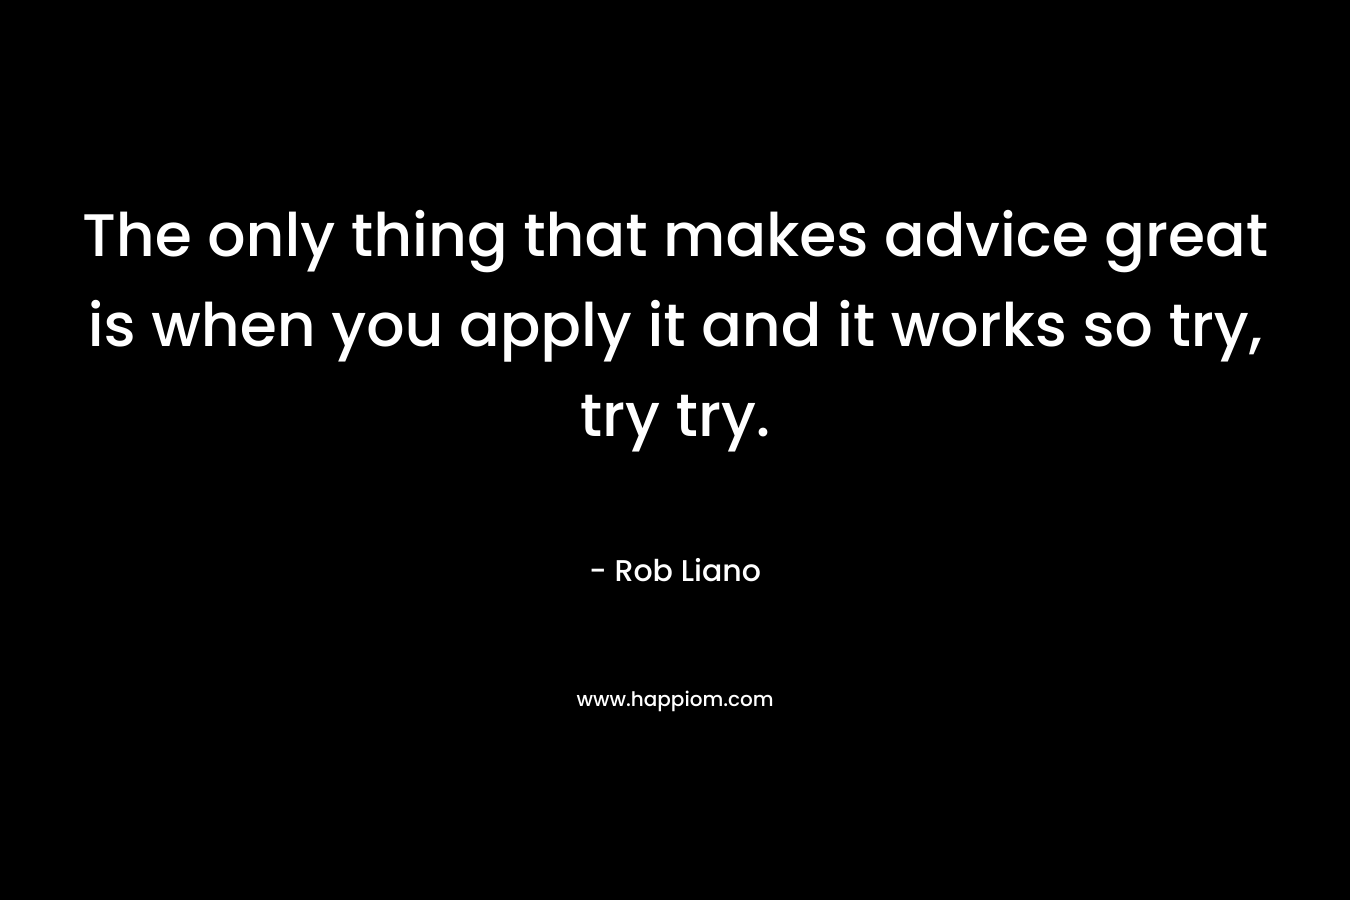 The only thing that makes advice great is when you apply it and it works so try, try try.